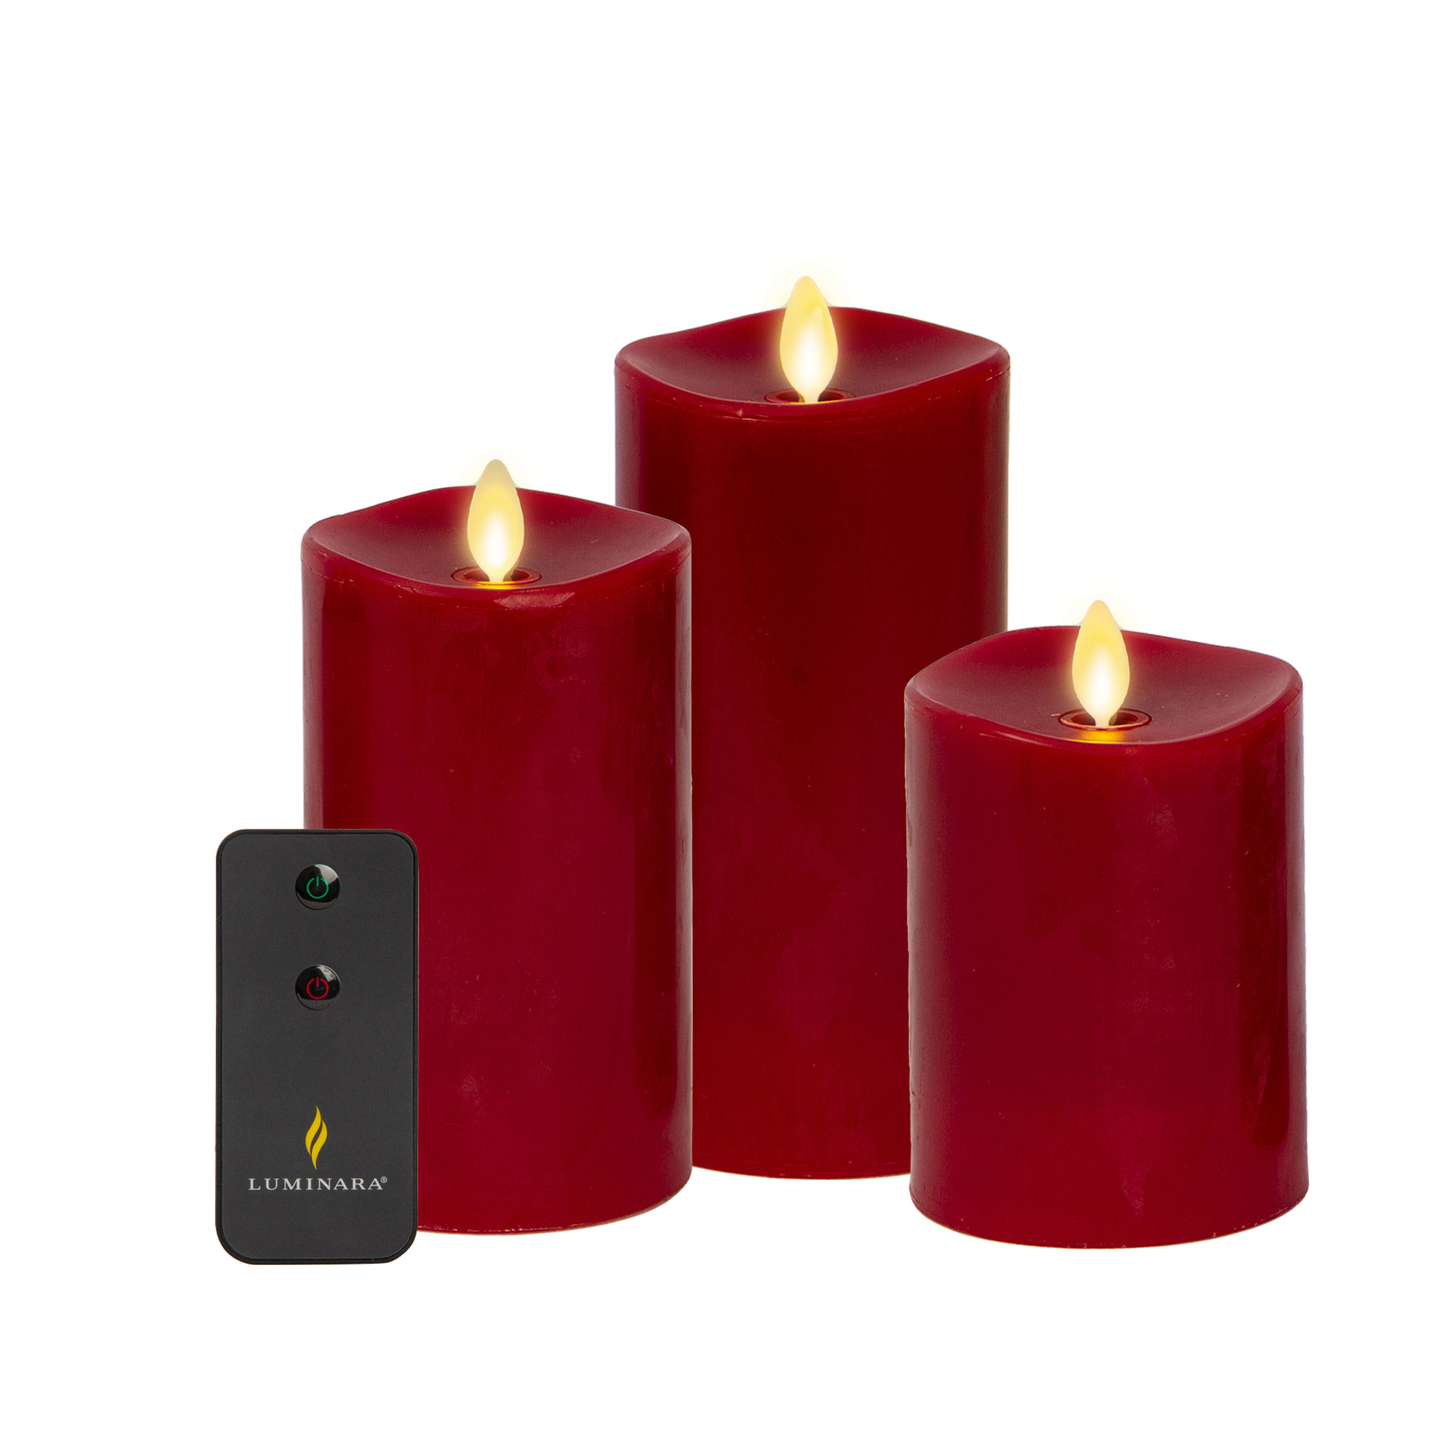 Burgundy Flameless Candle Pillars with Remote - Melted Top - Set of 3